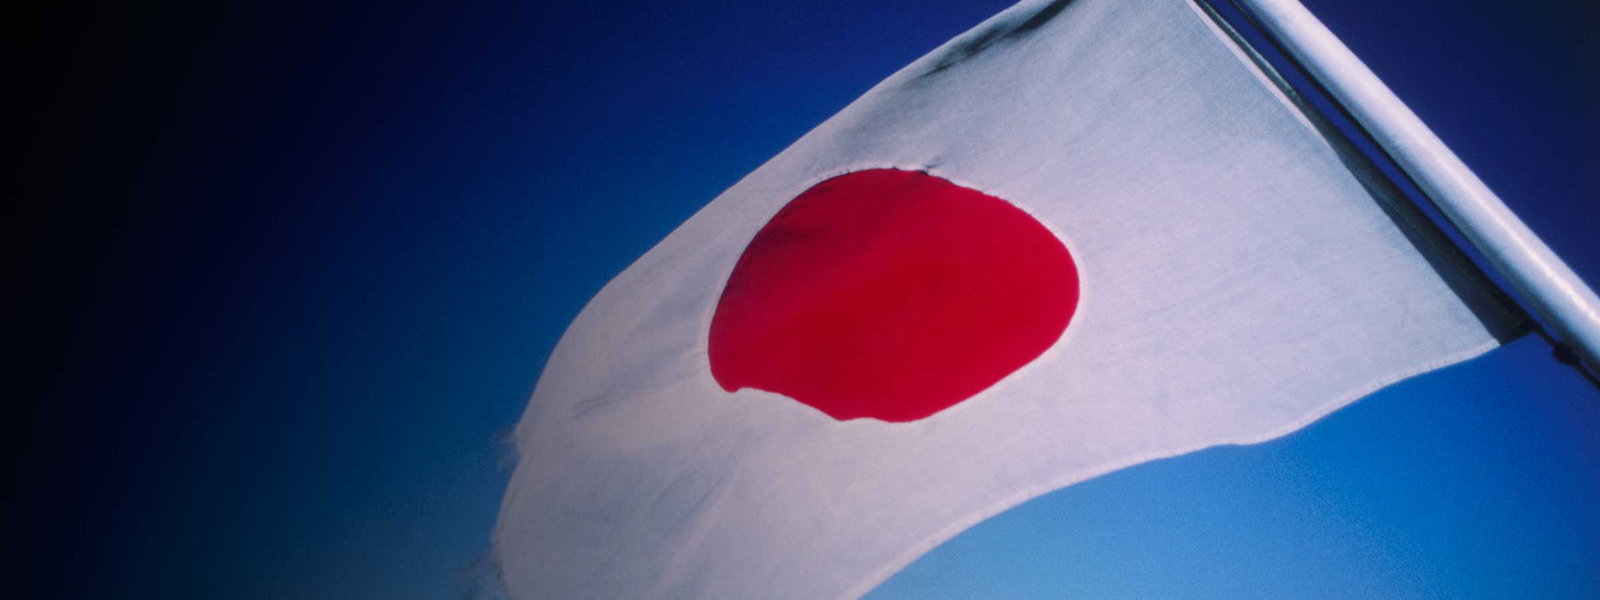 Inbound M&A in Japan: On the rise